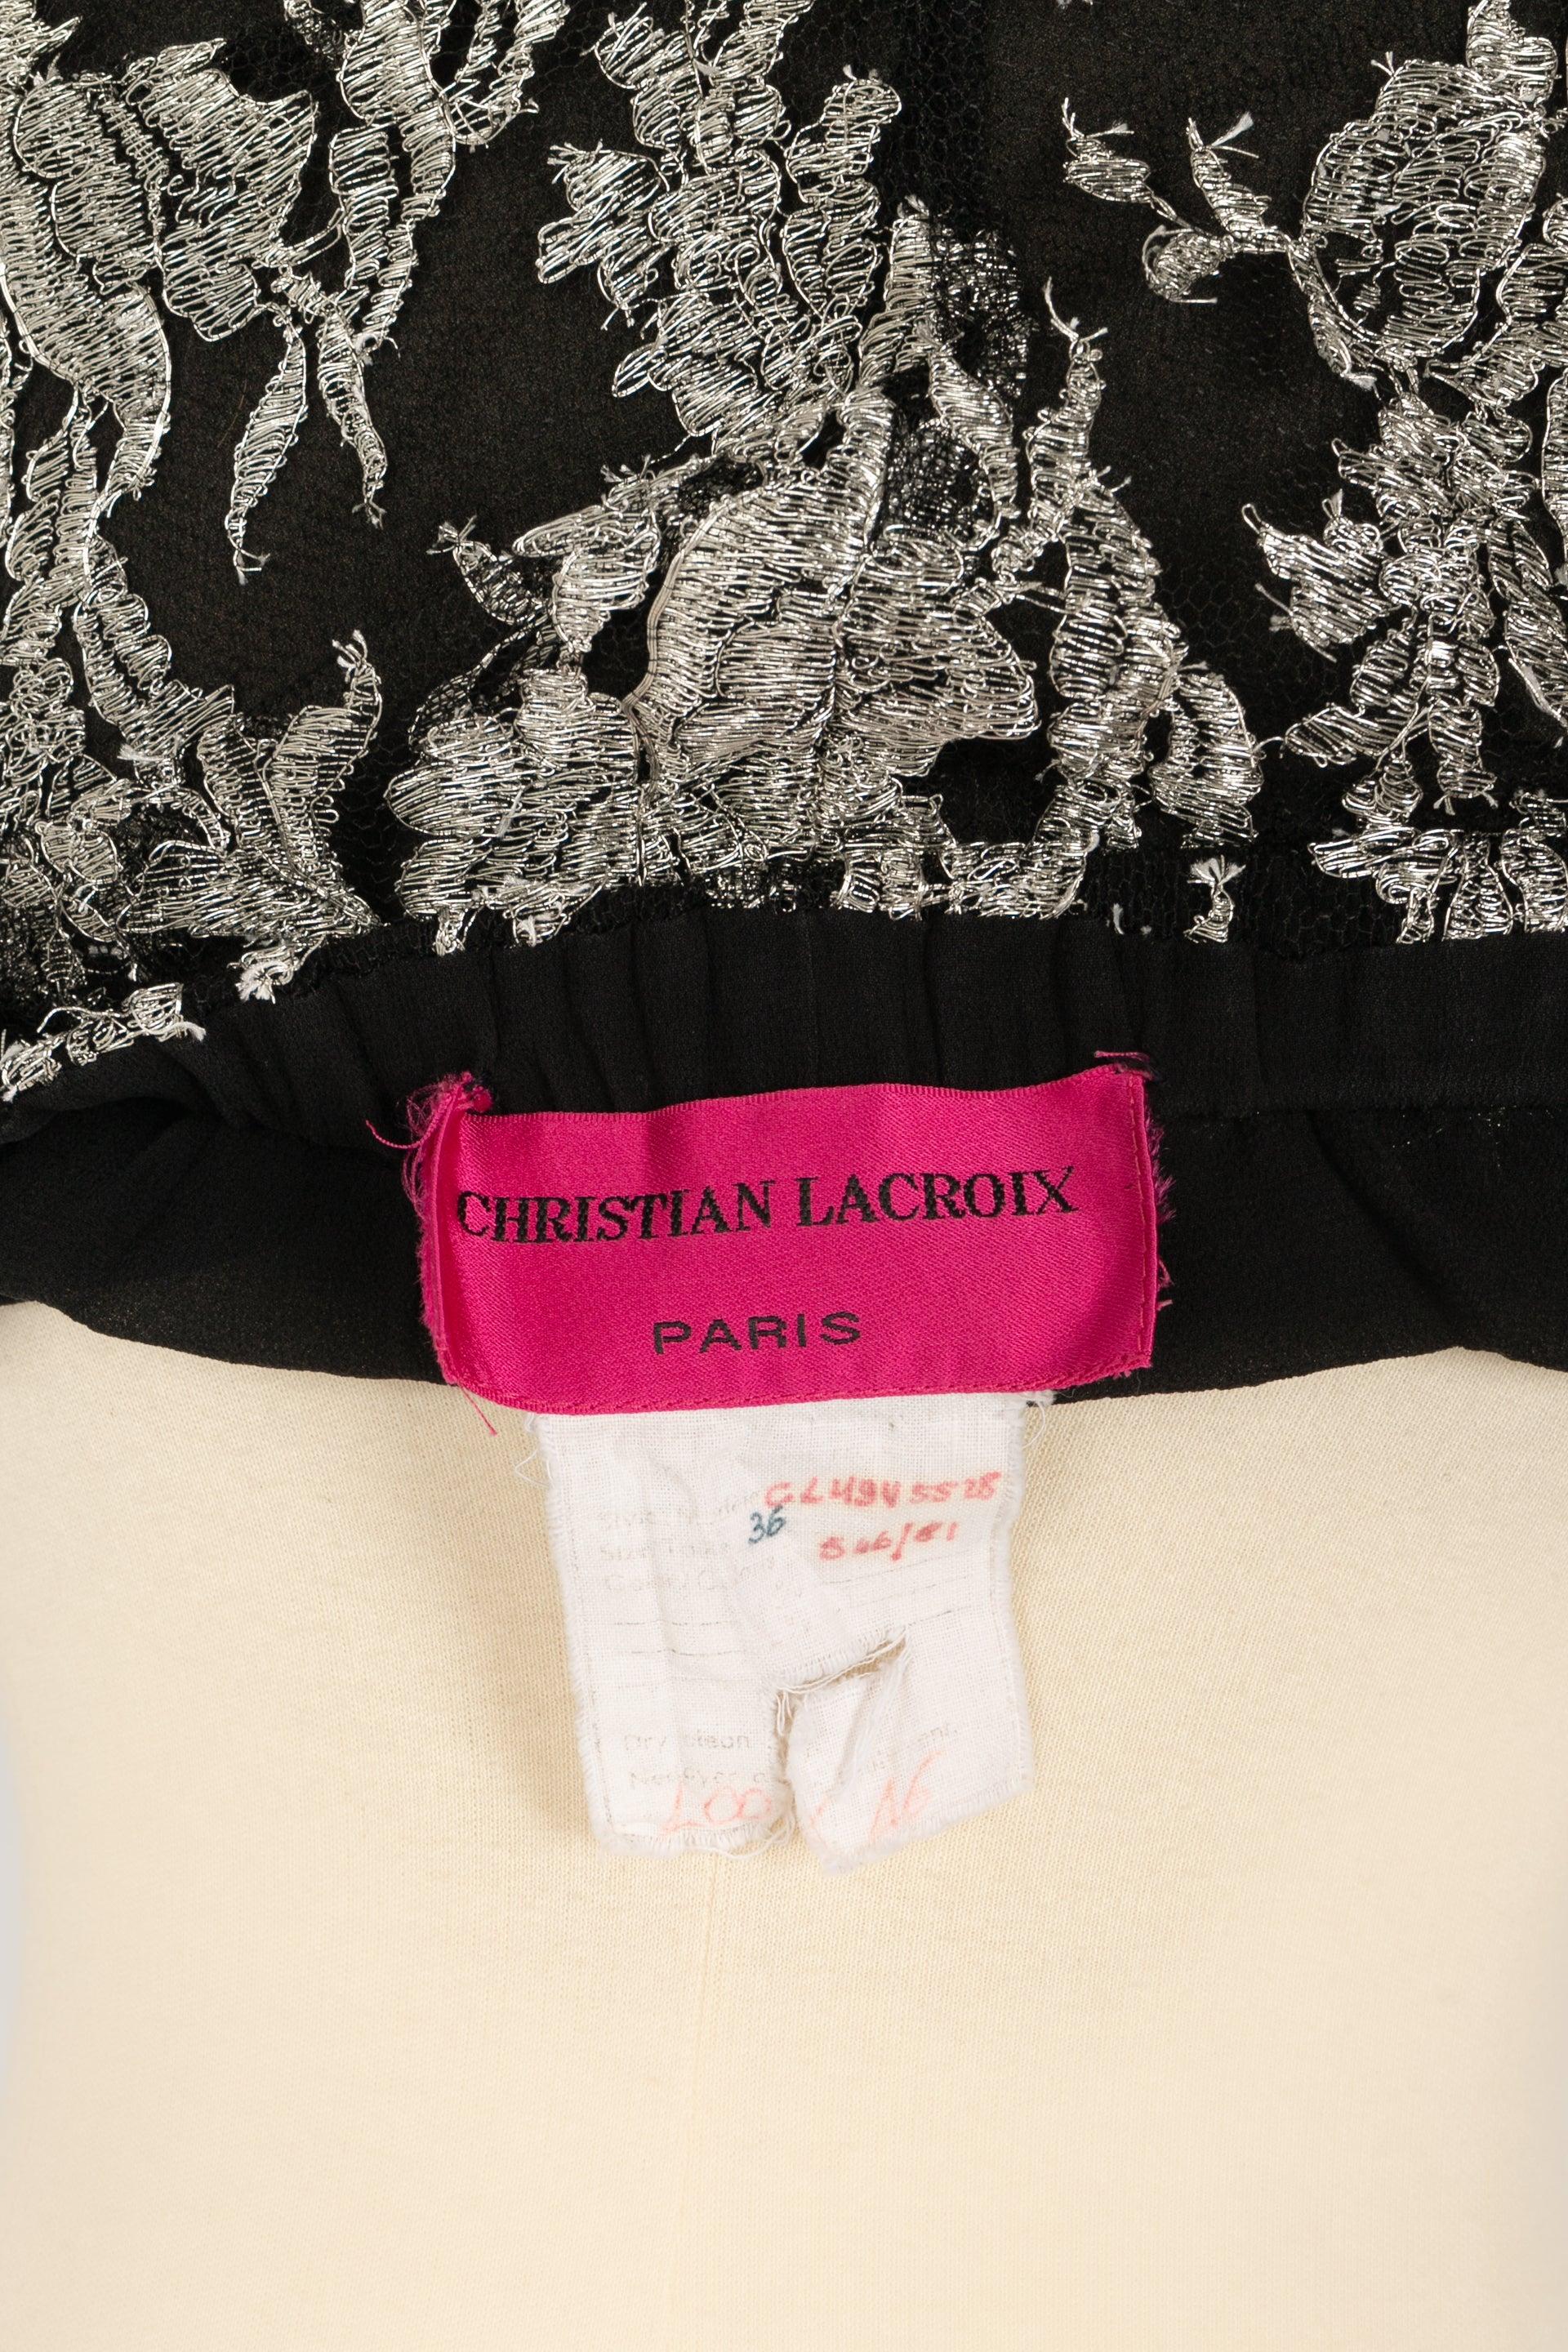 Christian Lacroix Pants Embroidered with Silvery Lurex Yarns For Sale 3